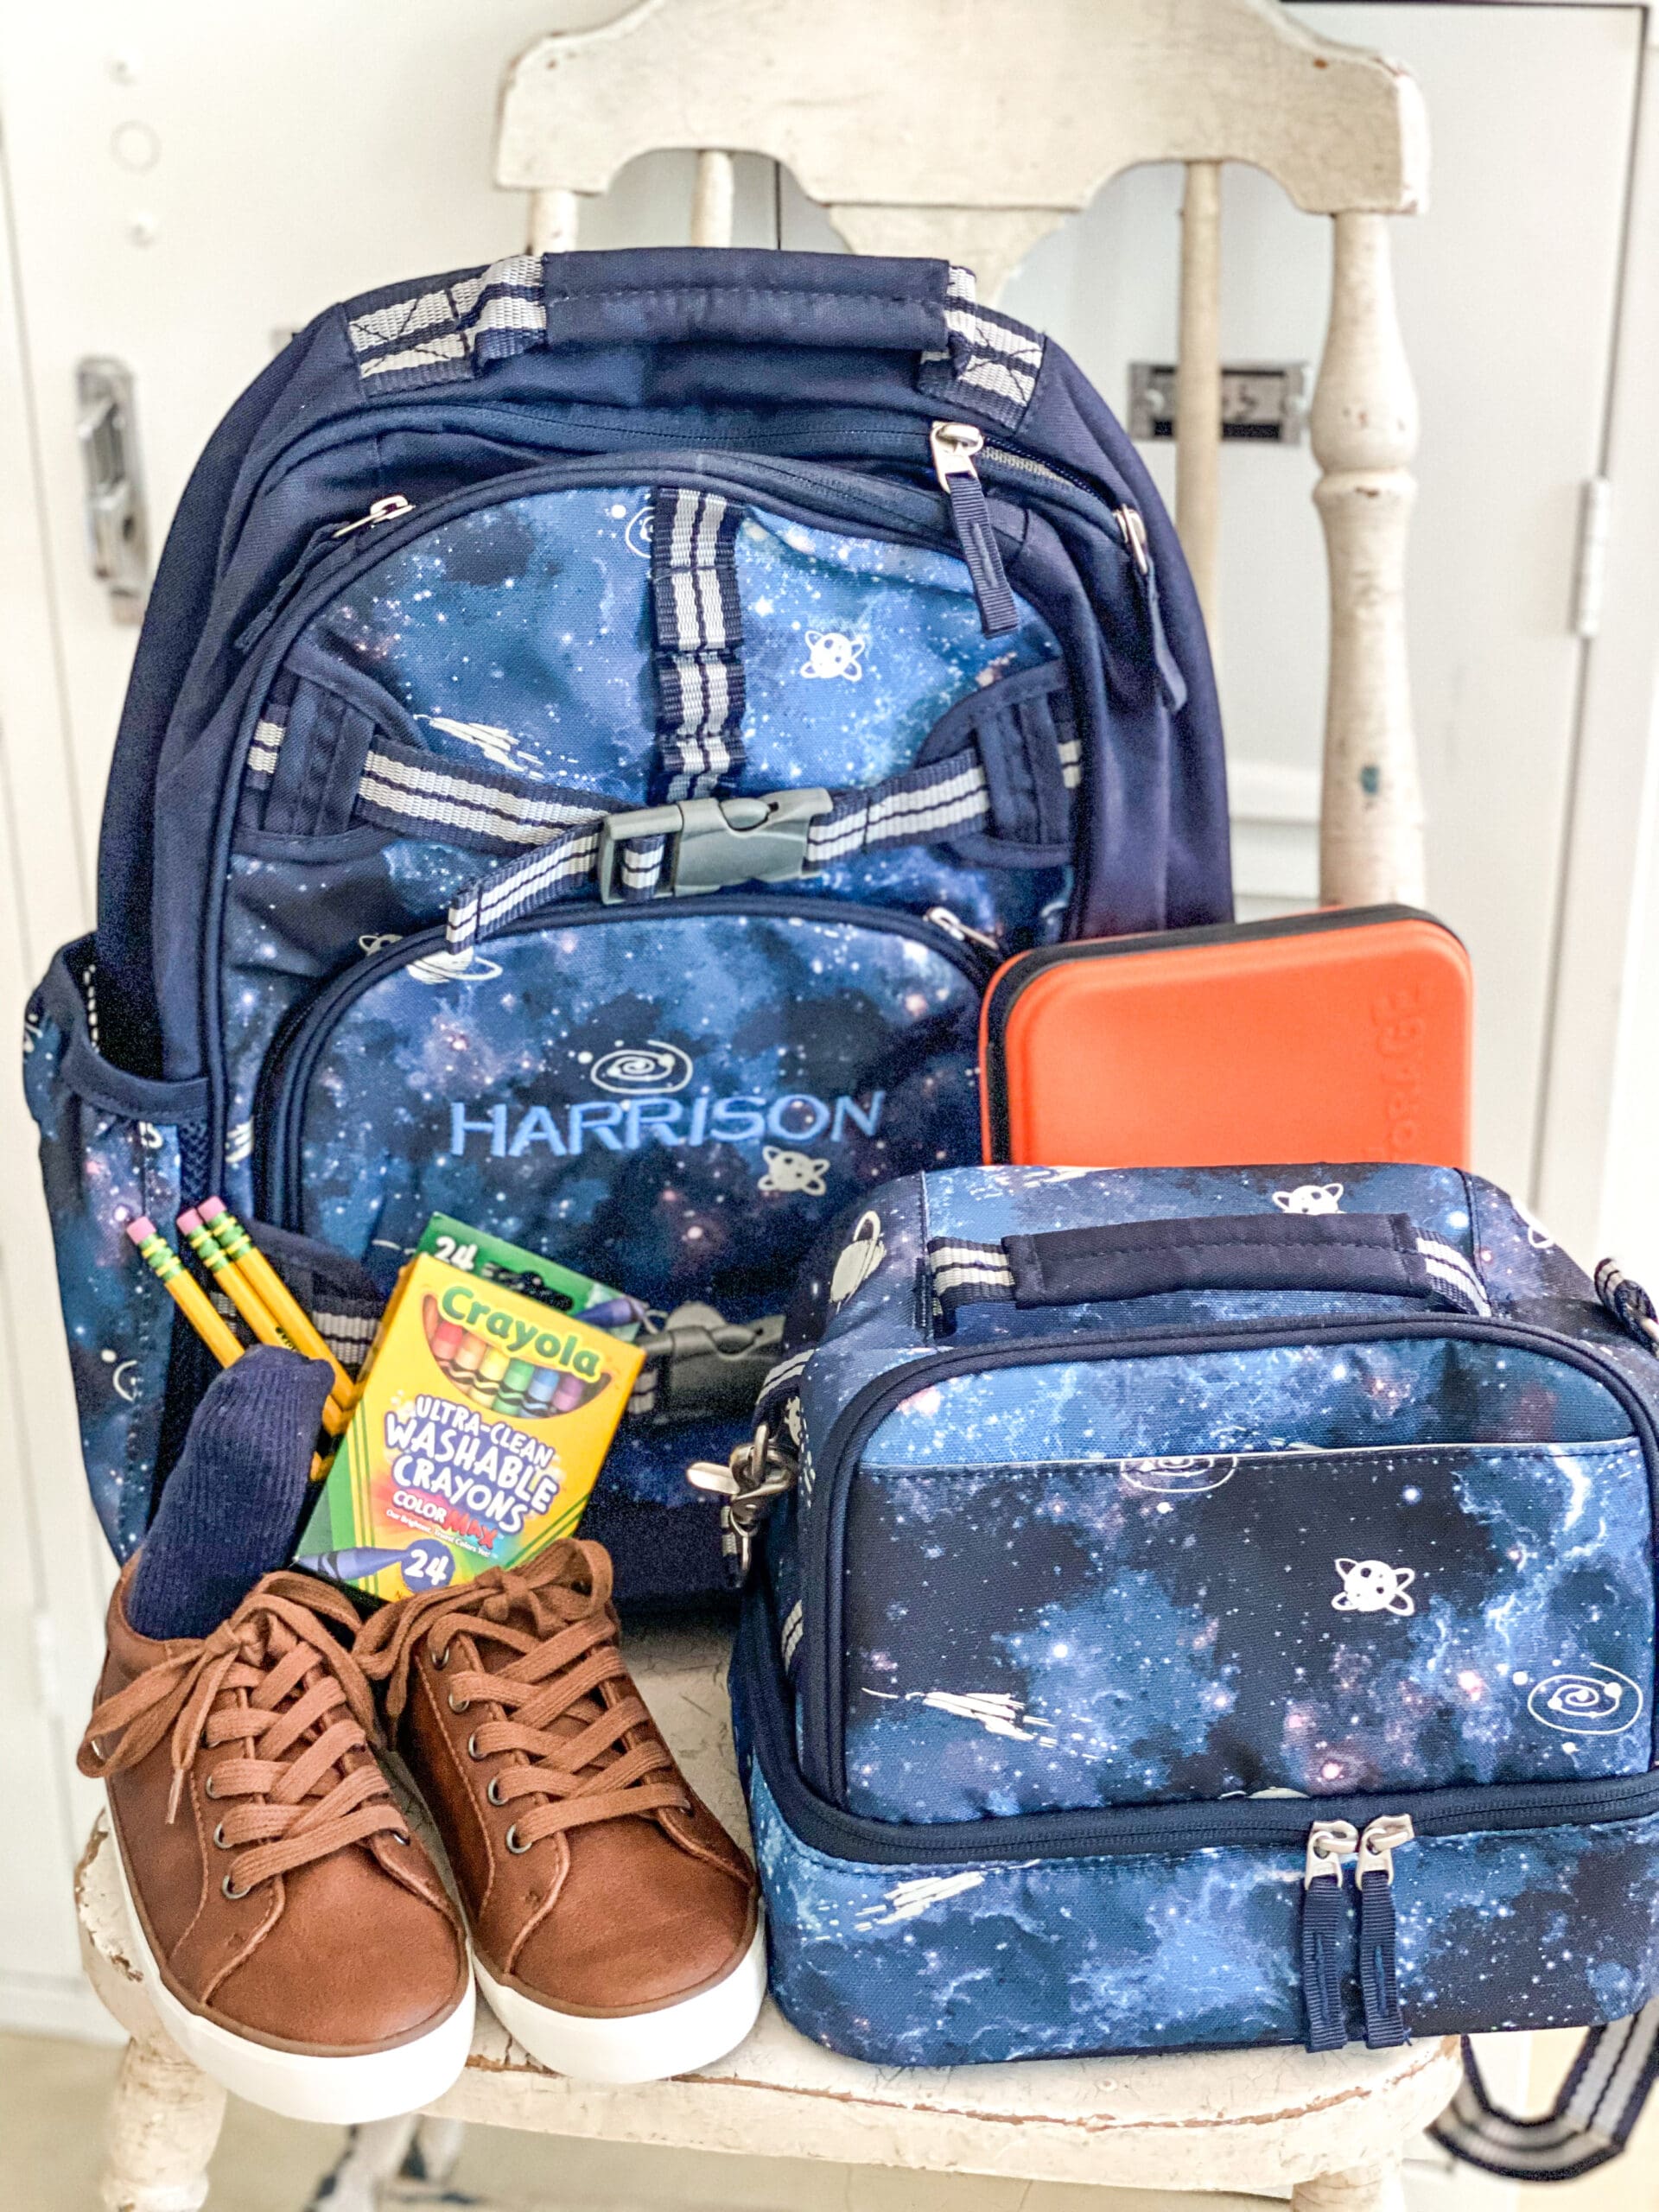 Harrison's monogrammed backpack with lunchbox & shoes with crayons & pencils